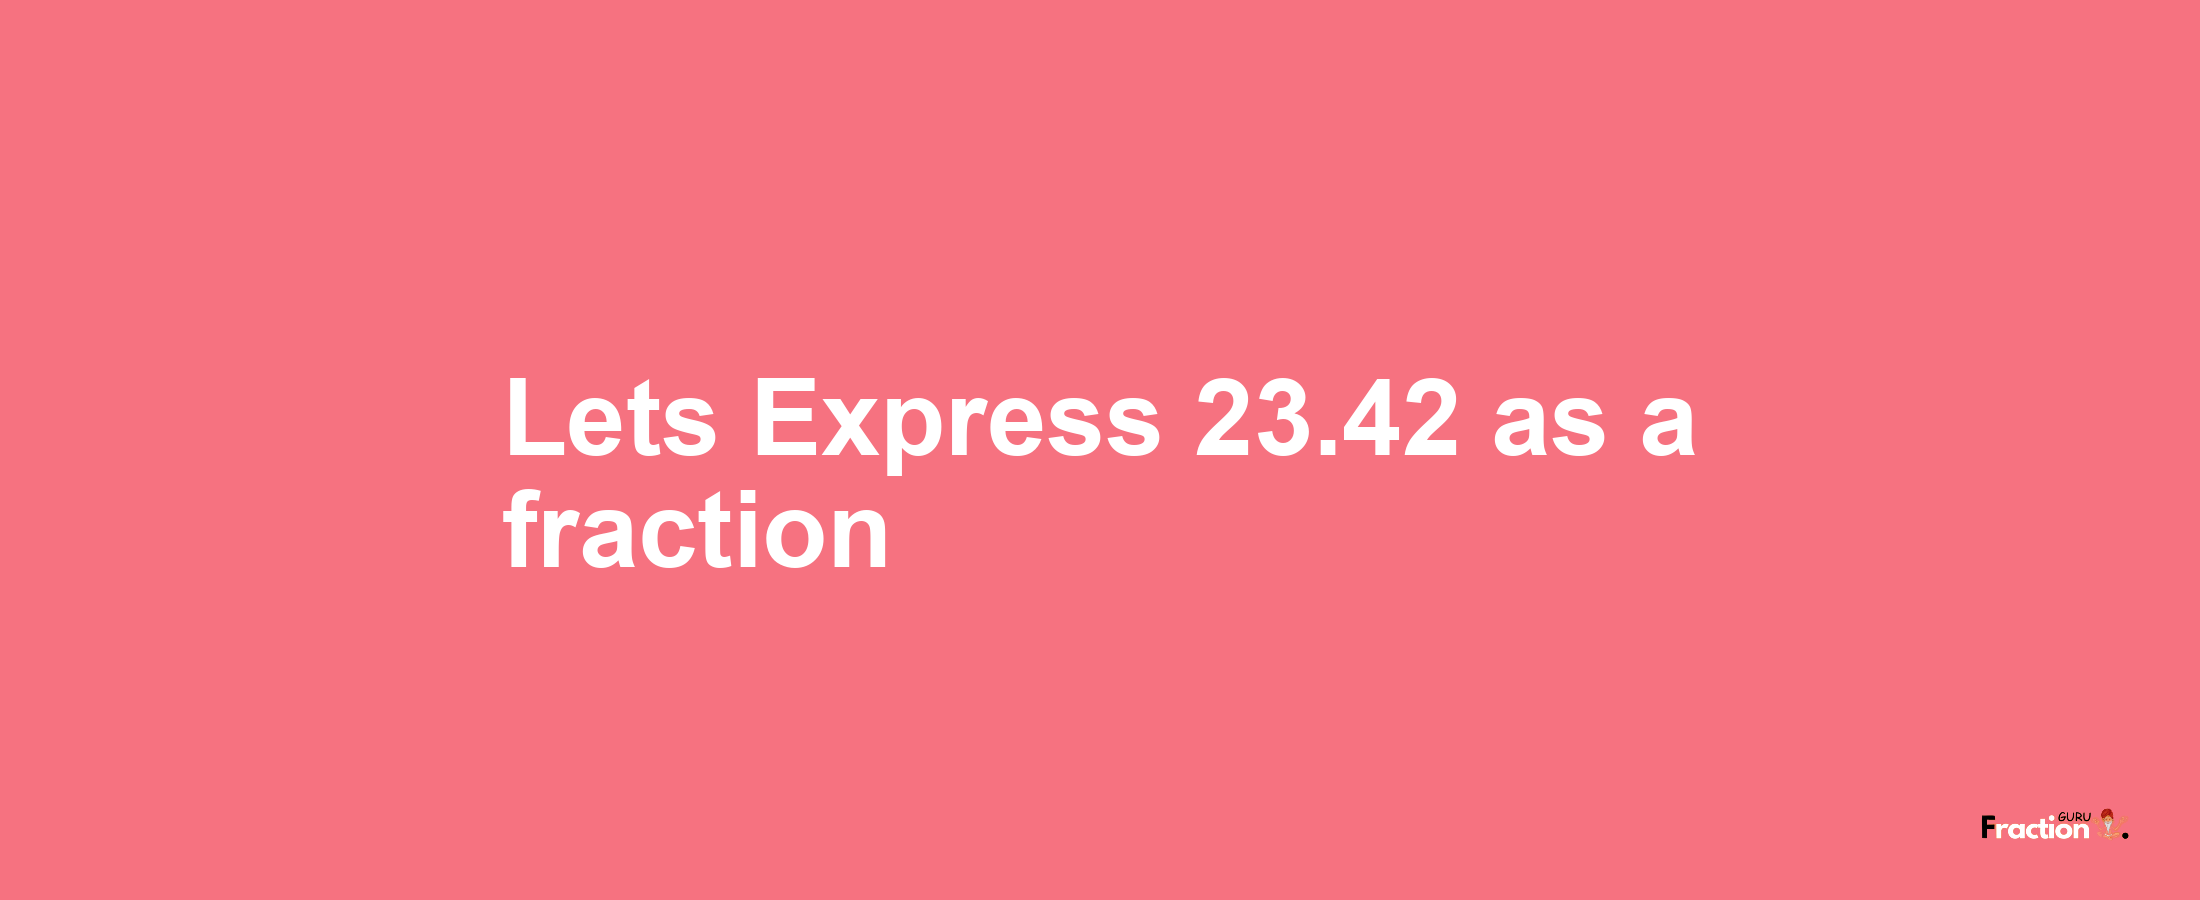 Lets Express 23.42 as afraction